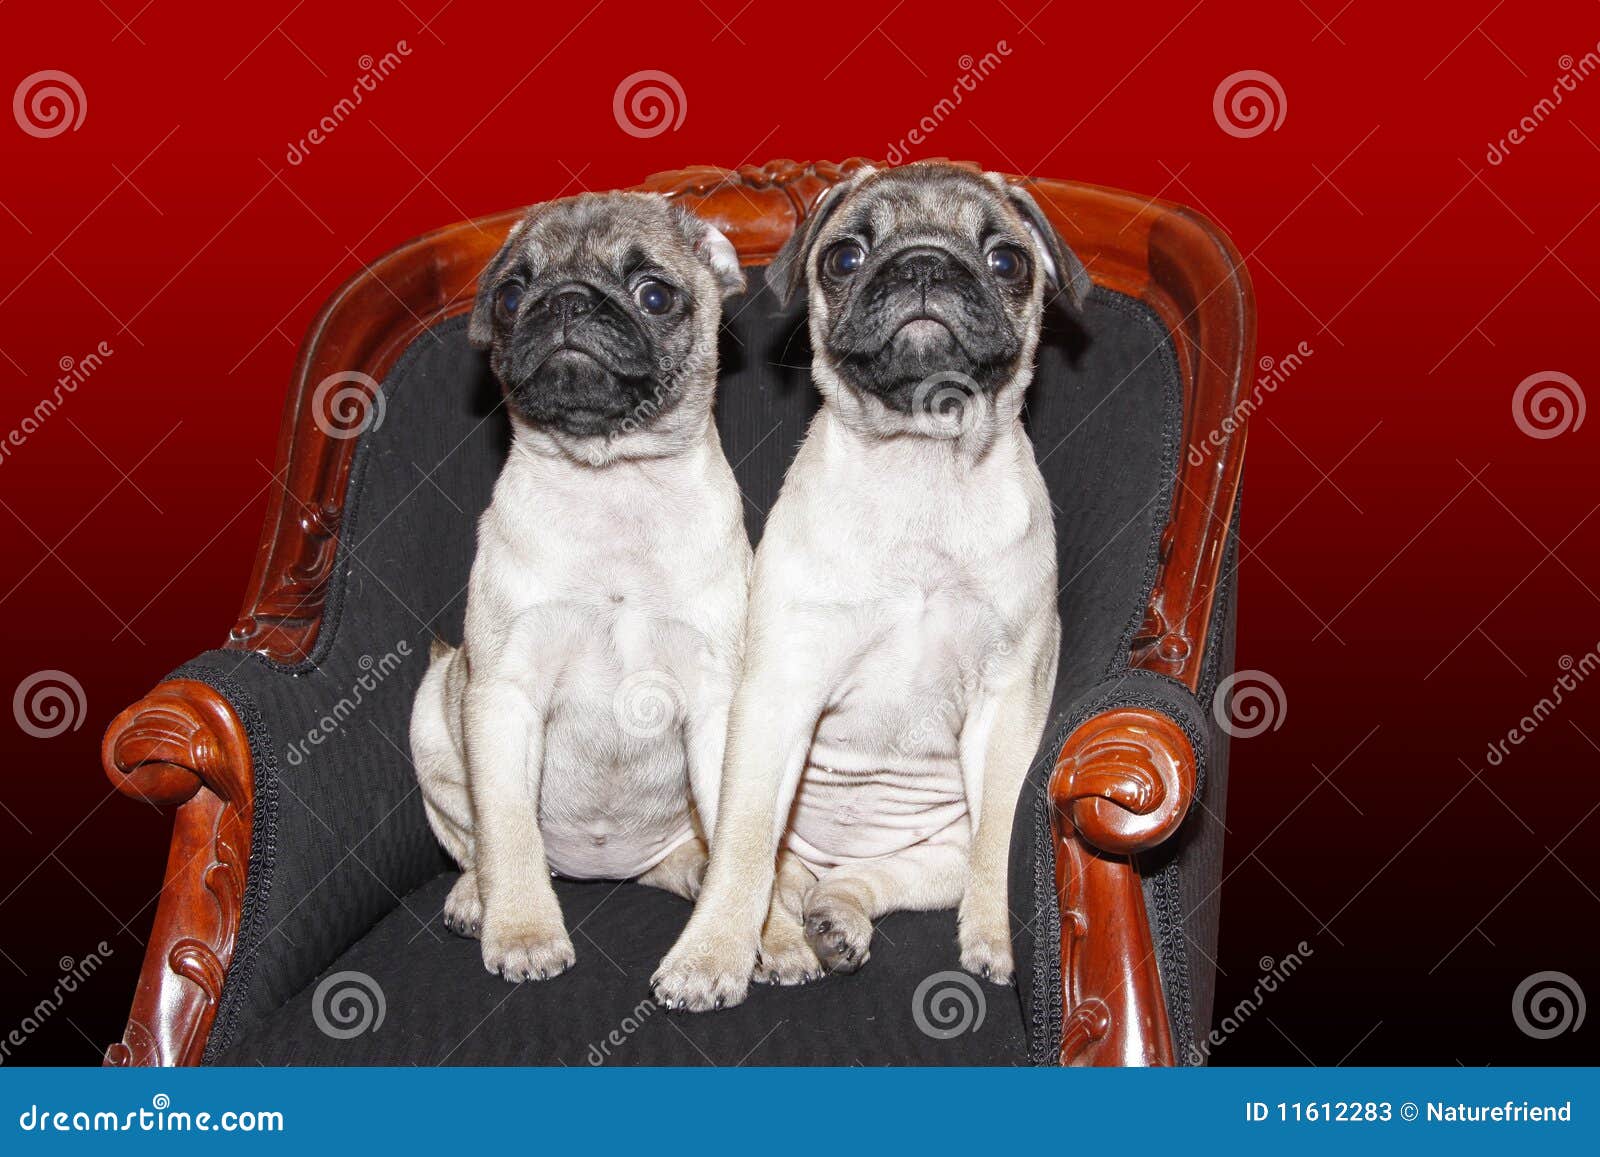 young 10 months old pugs